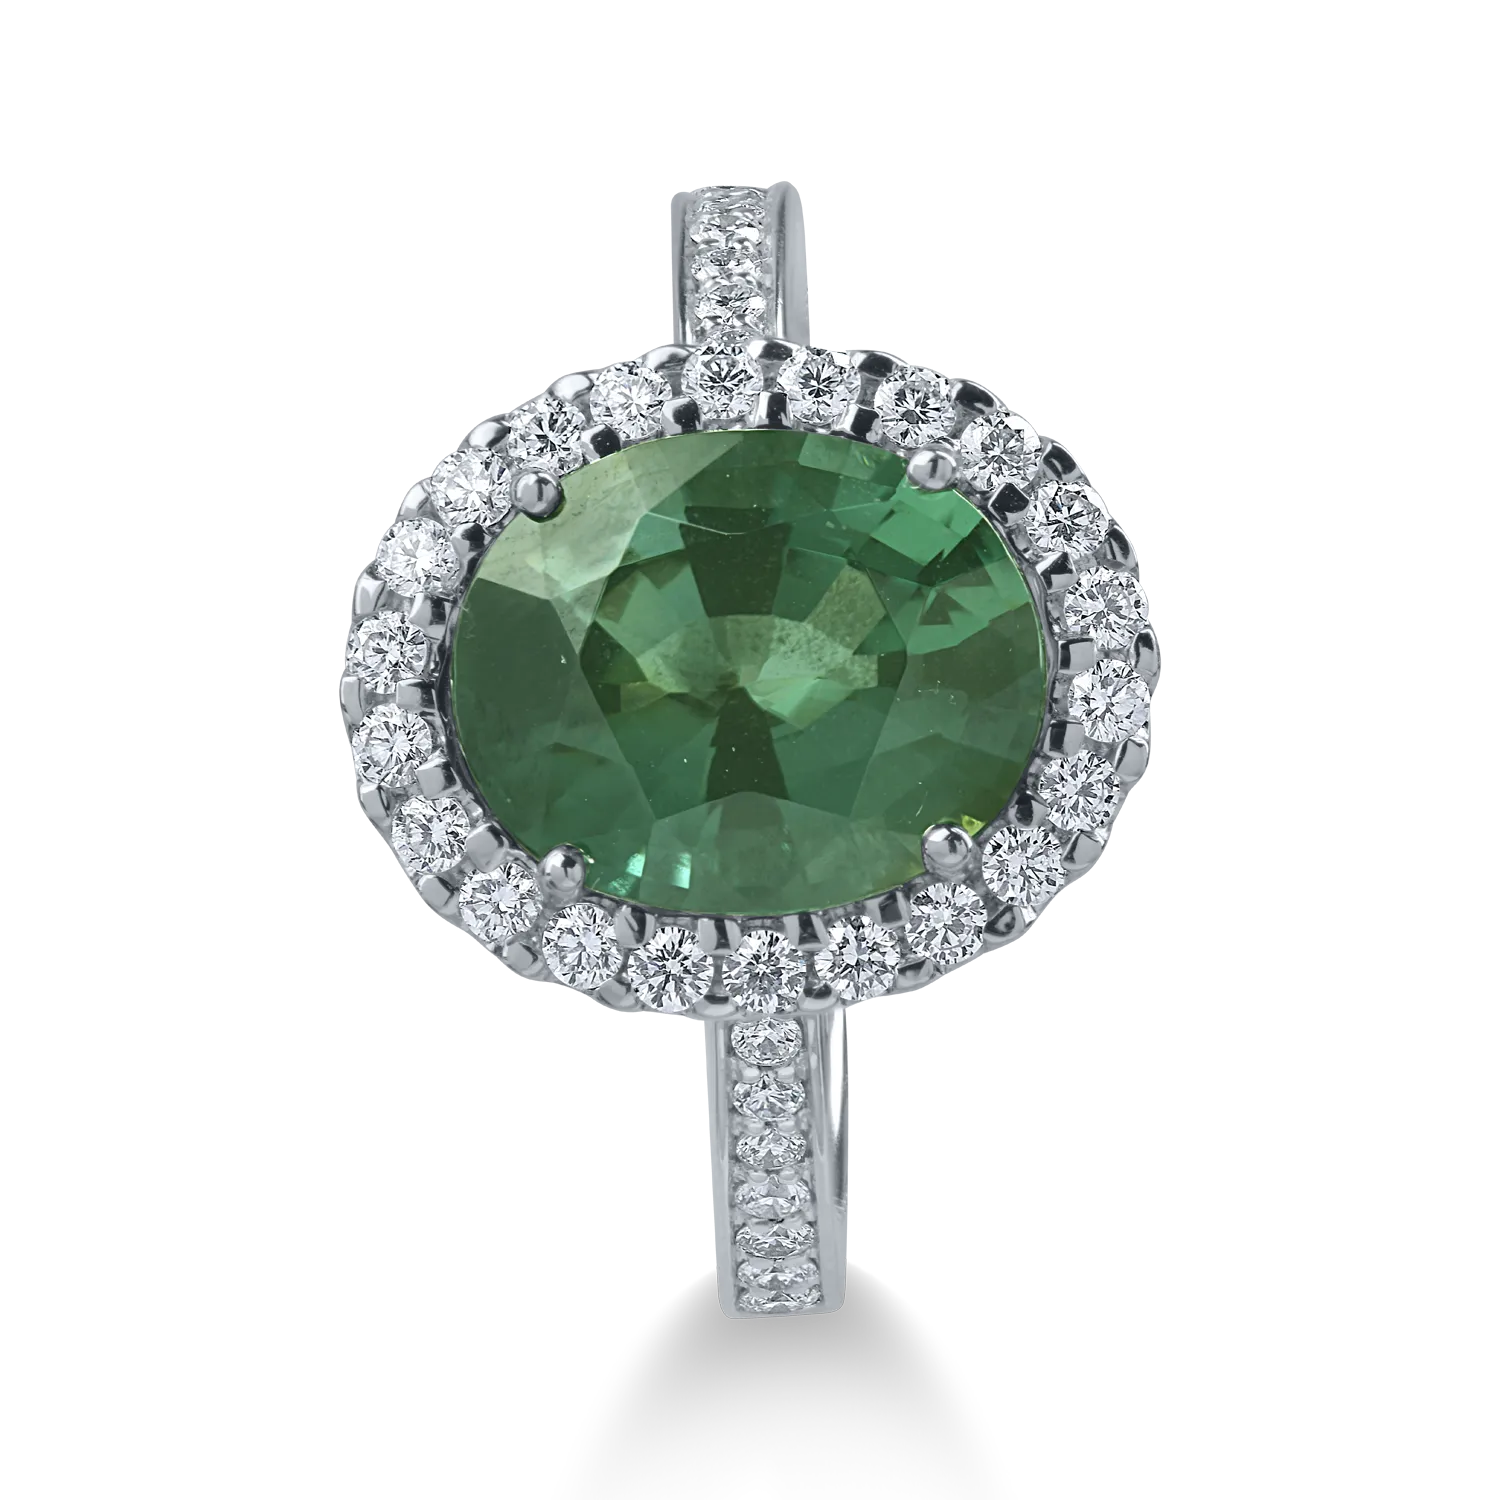 White gold ring with 3.1ct green tourmaline and 0.4ct diamonds